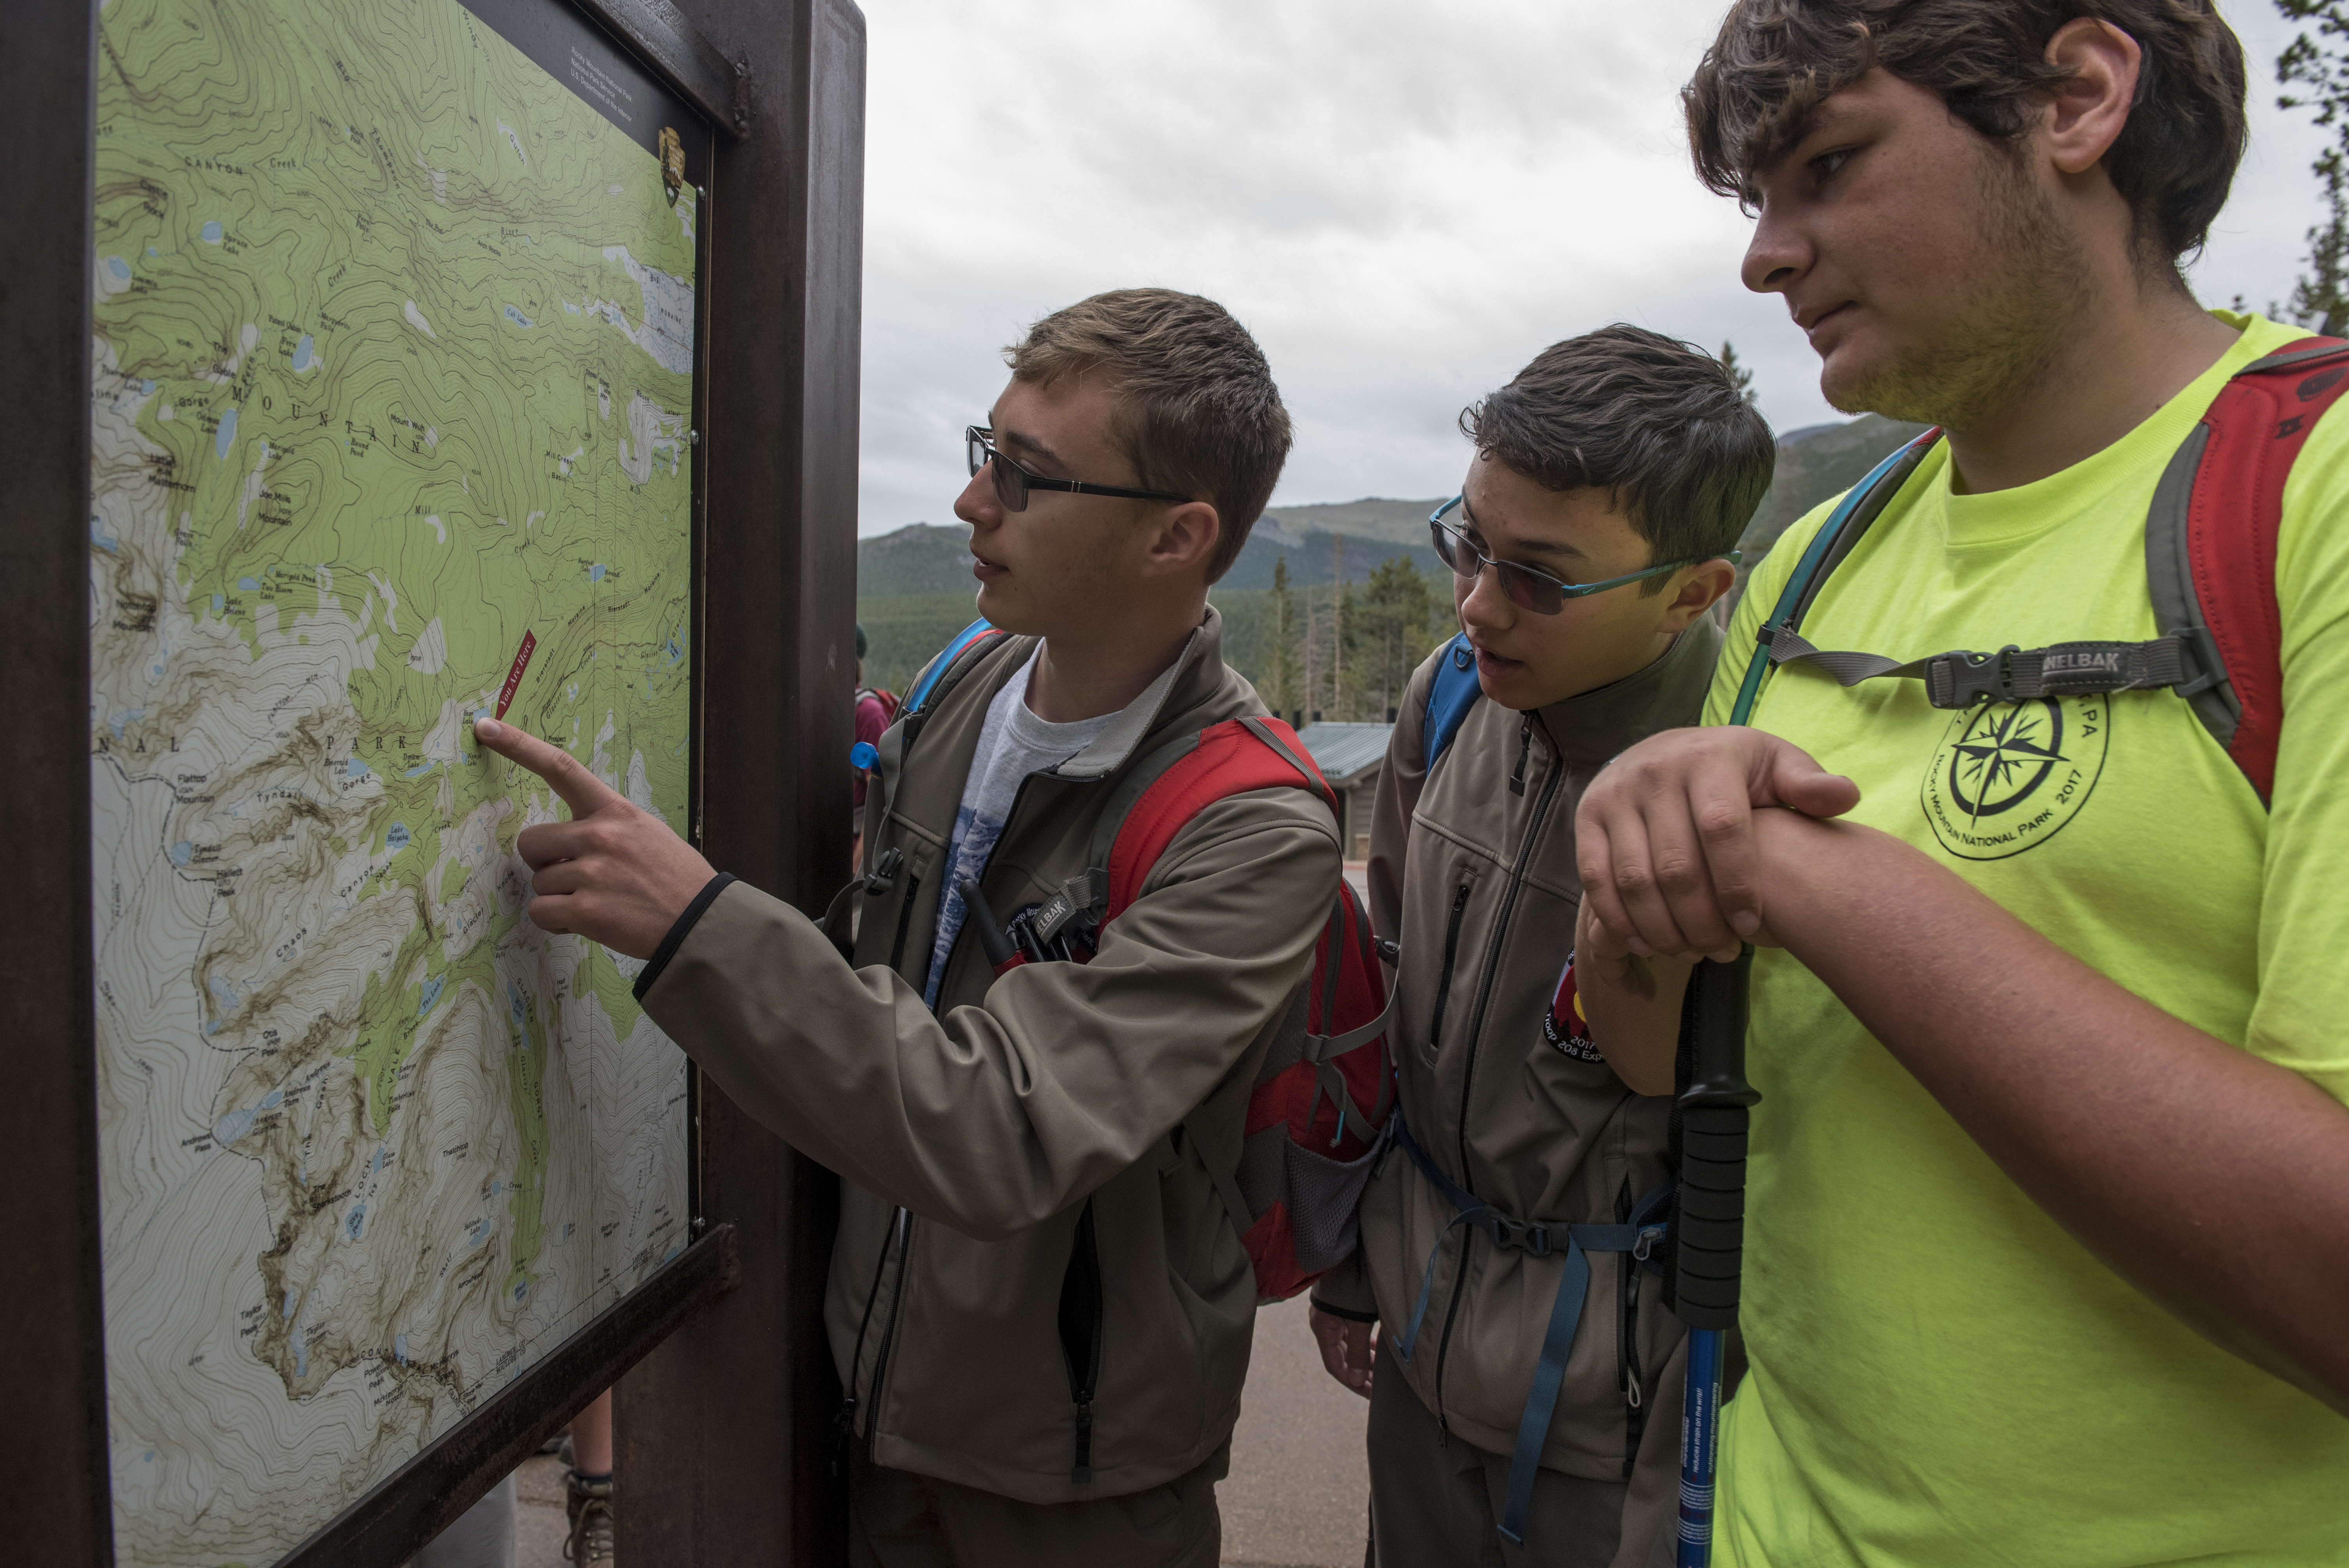 Scouts from Troop 208 in PA arrive at the trailhead for their hike to Sky Pond, in Rocky Mountain National Park, Colorado